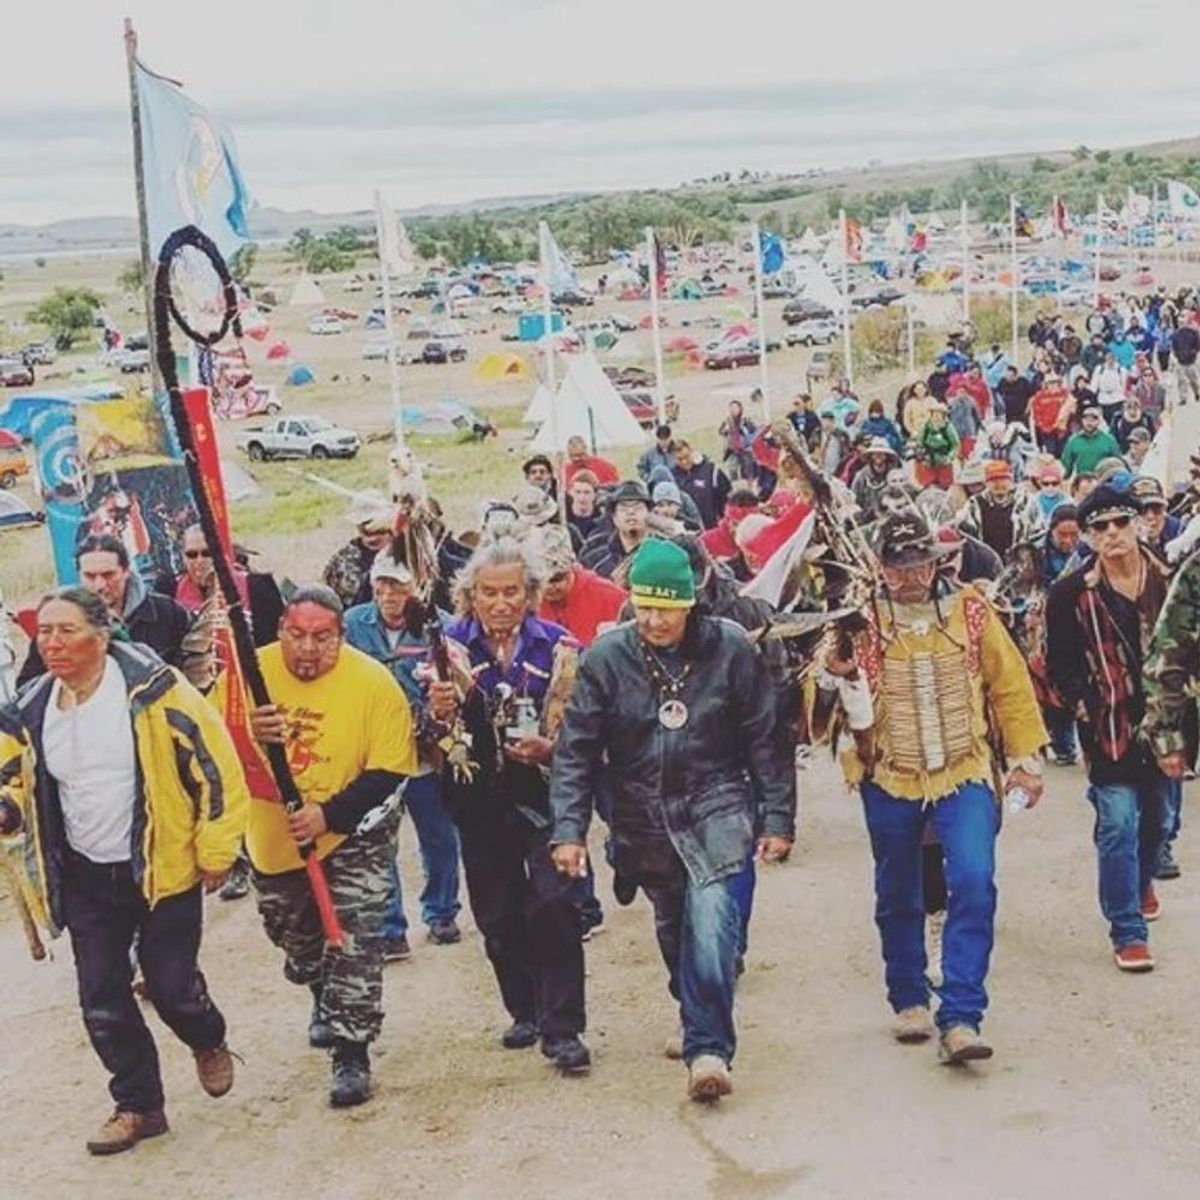 Find Out How Folks Are Using Facebook to Help the #StandingRock #NoDAPL Protests